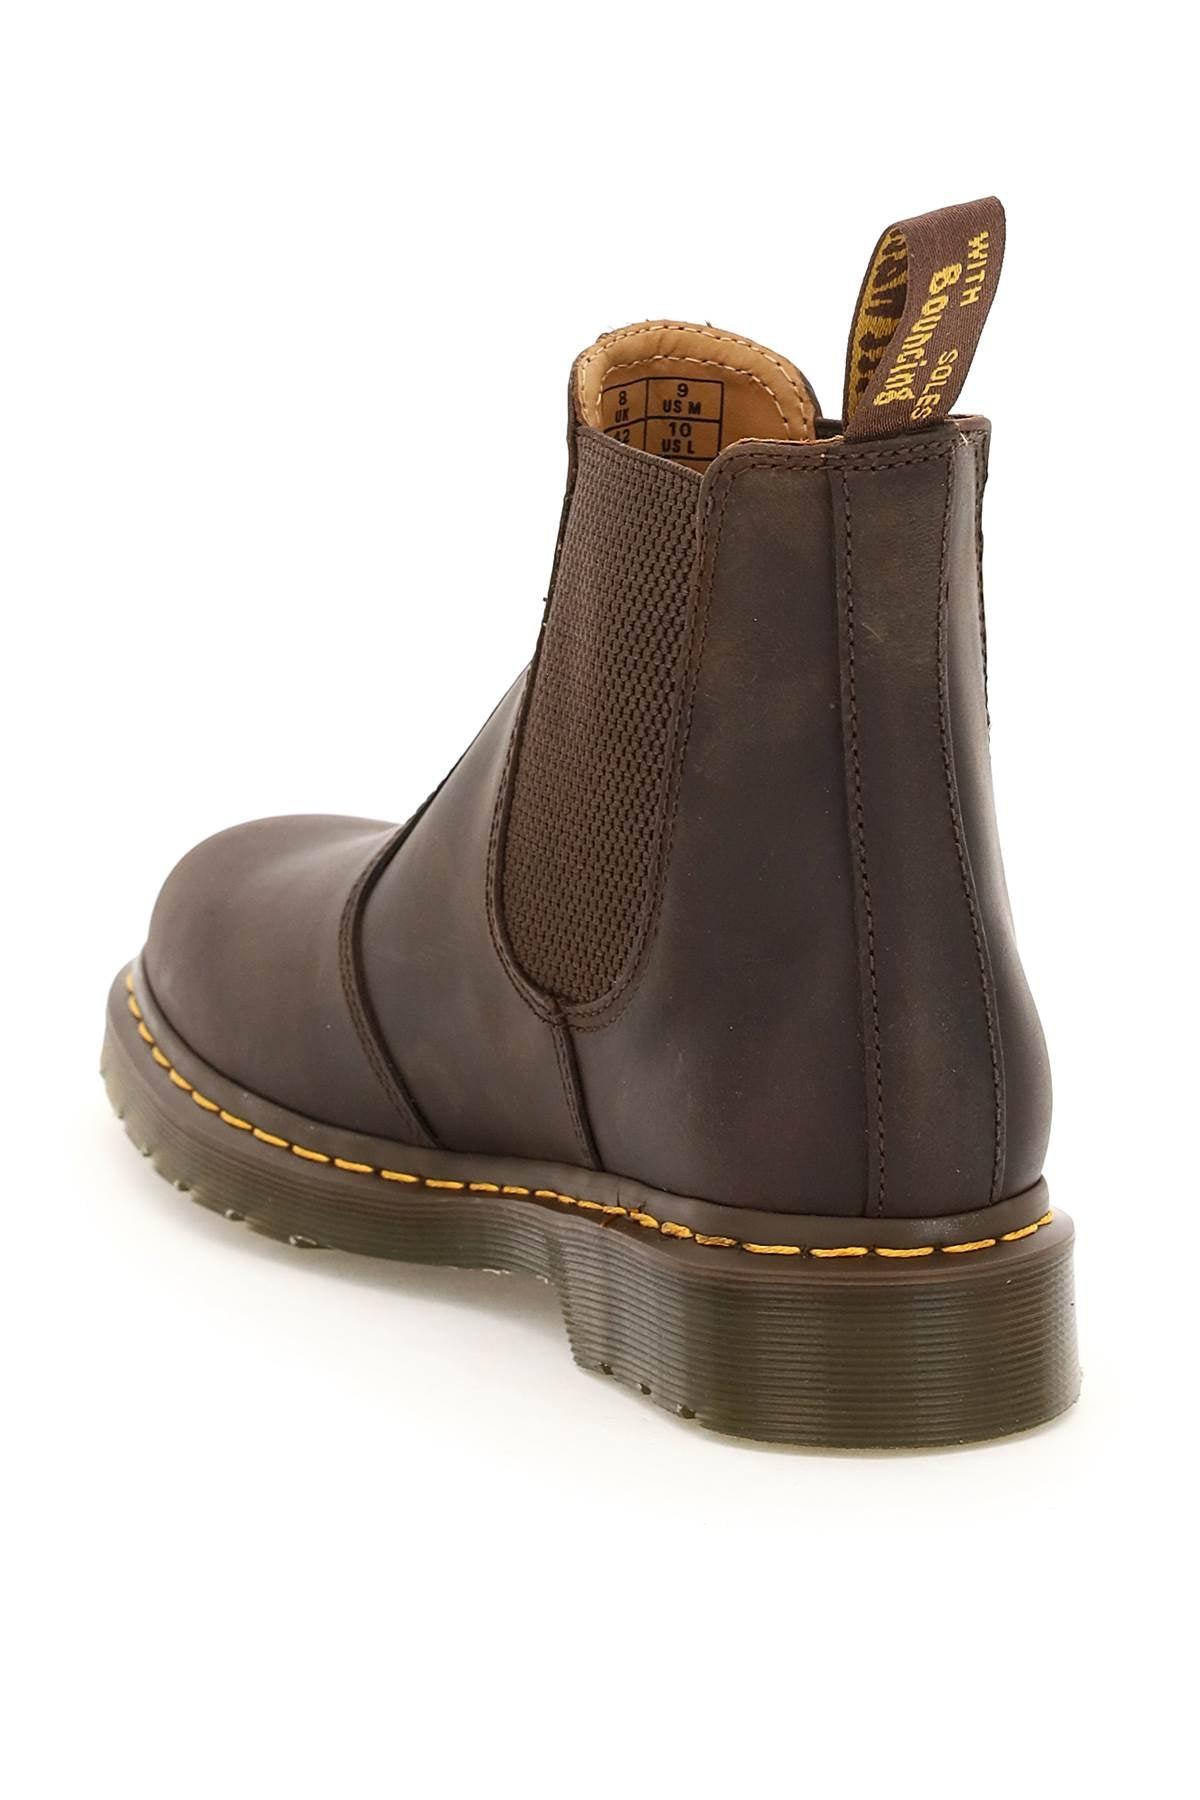 Dr. Martens Crazy Horse Leather 2976 Chelsea Boots in Dark Brown (Brown)  for Men | Lyst